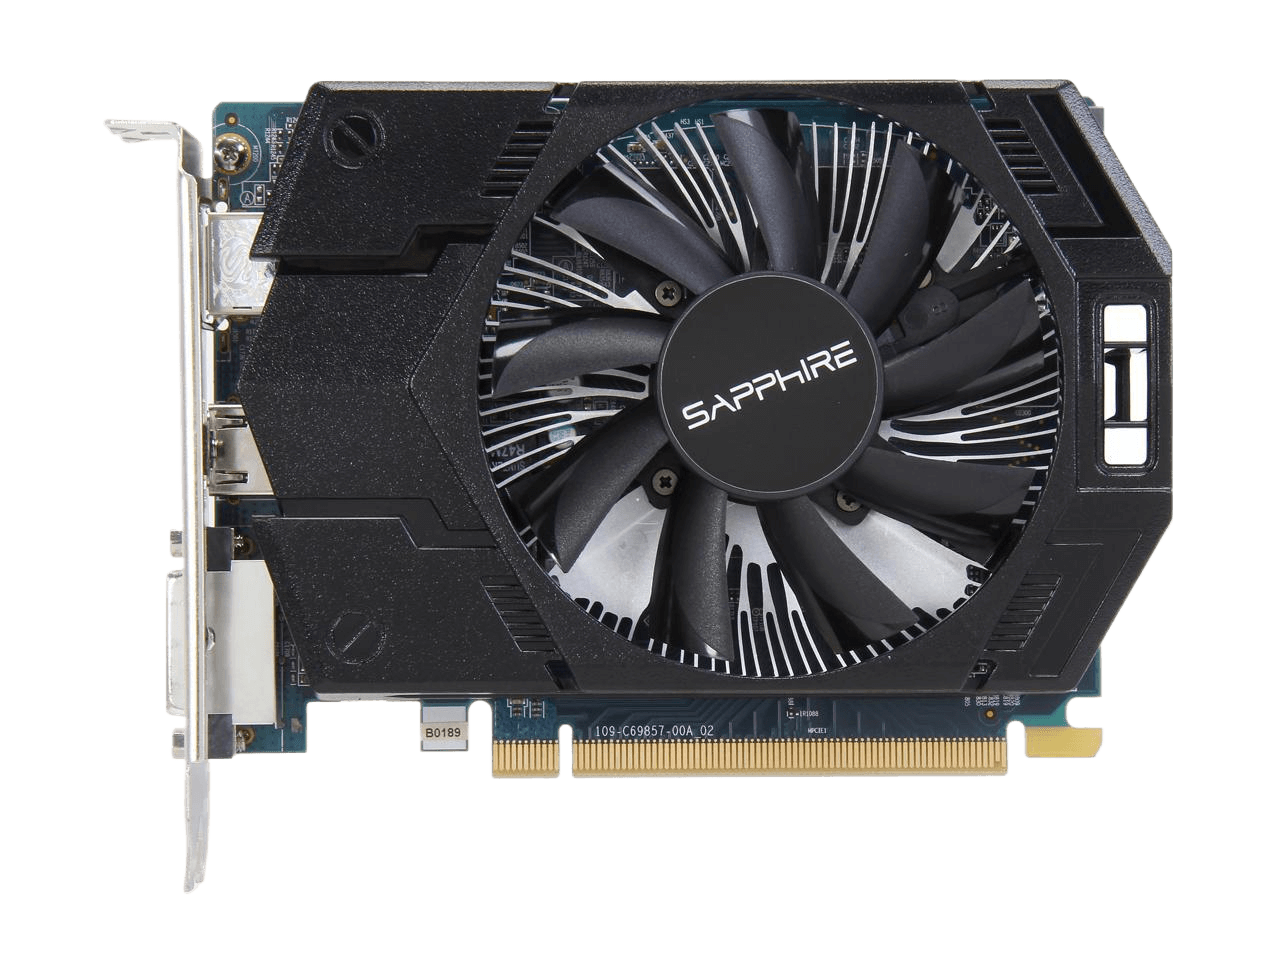 Sapphire Radeon R7 250X Graphic Card - 950 MHz Core - 1 GB GDDR5 - PCI Express 3.0 - Dual Slot Space Required